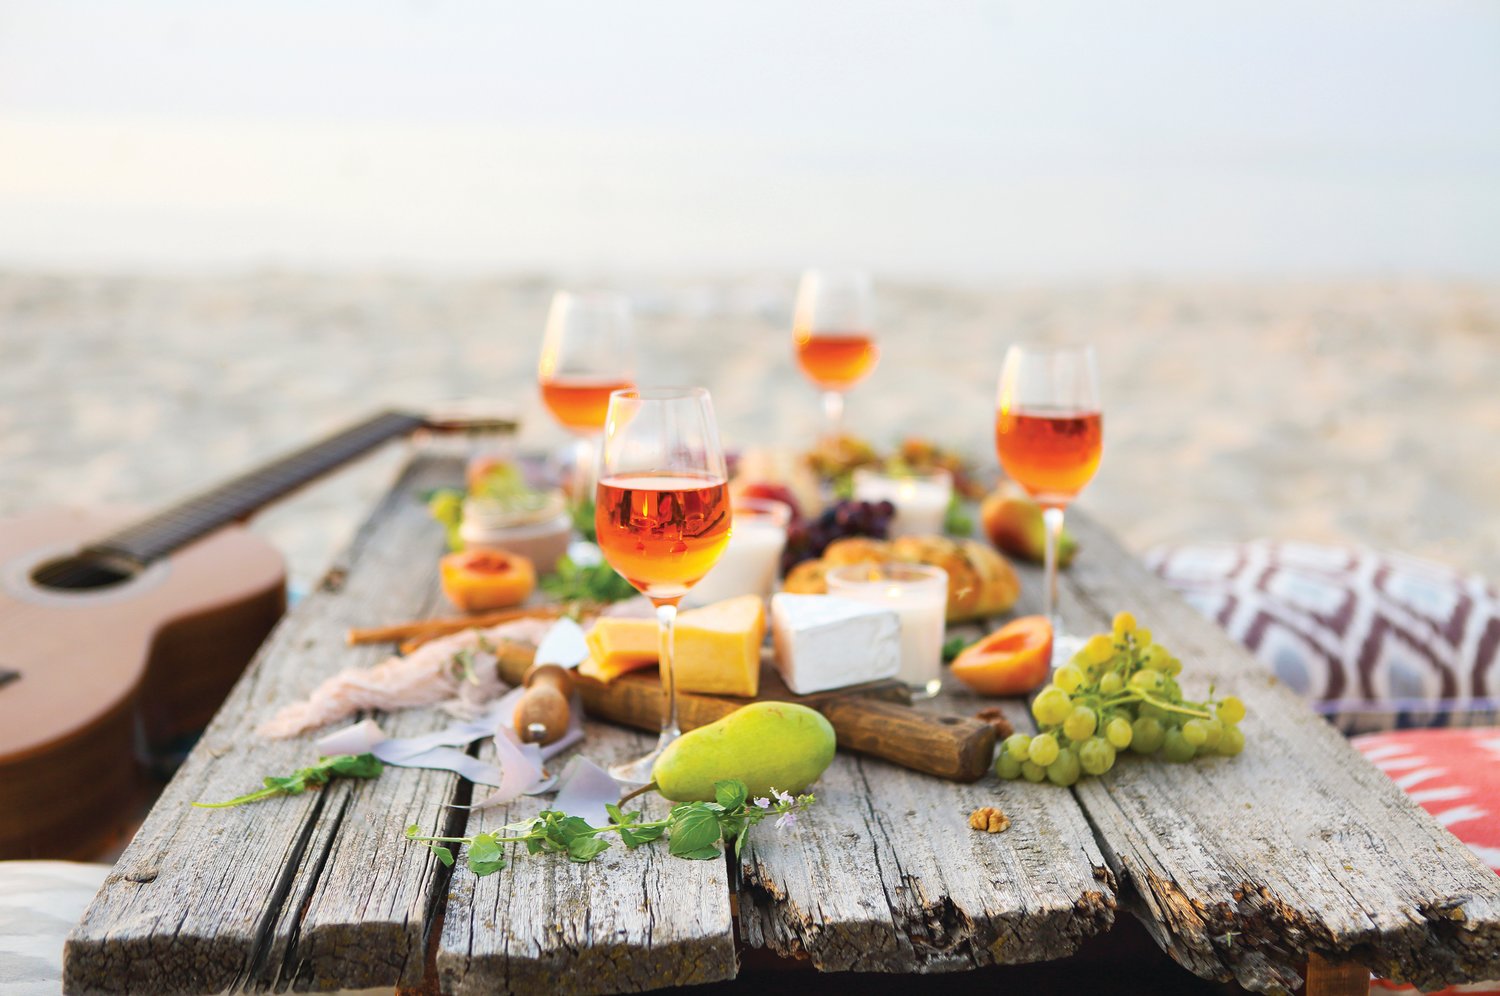 Options abound for the perfect wine to accentuate your summer picnic.